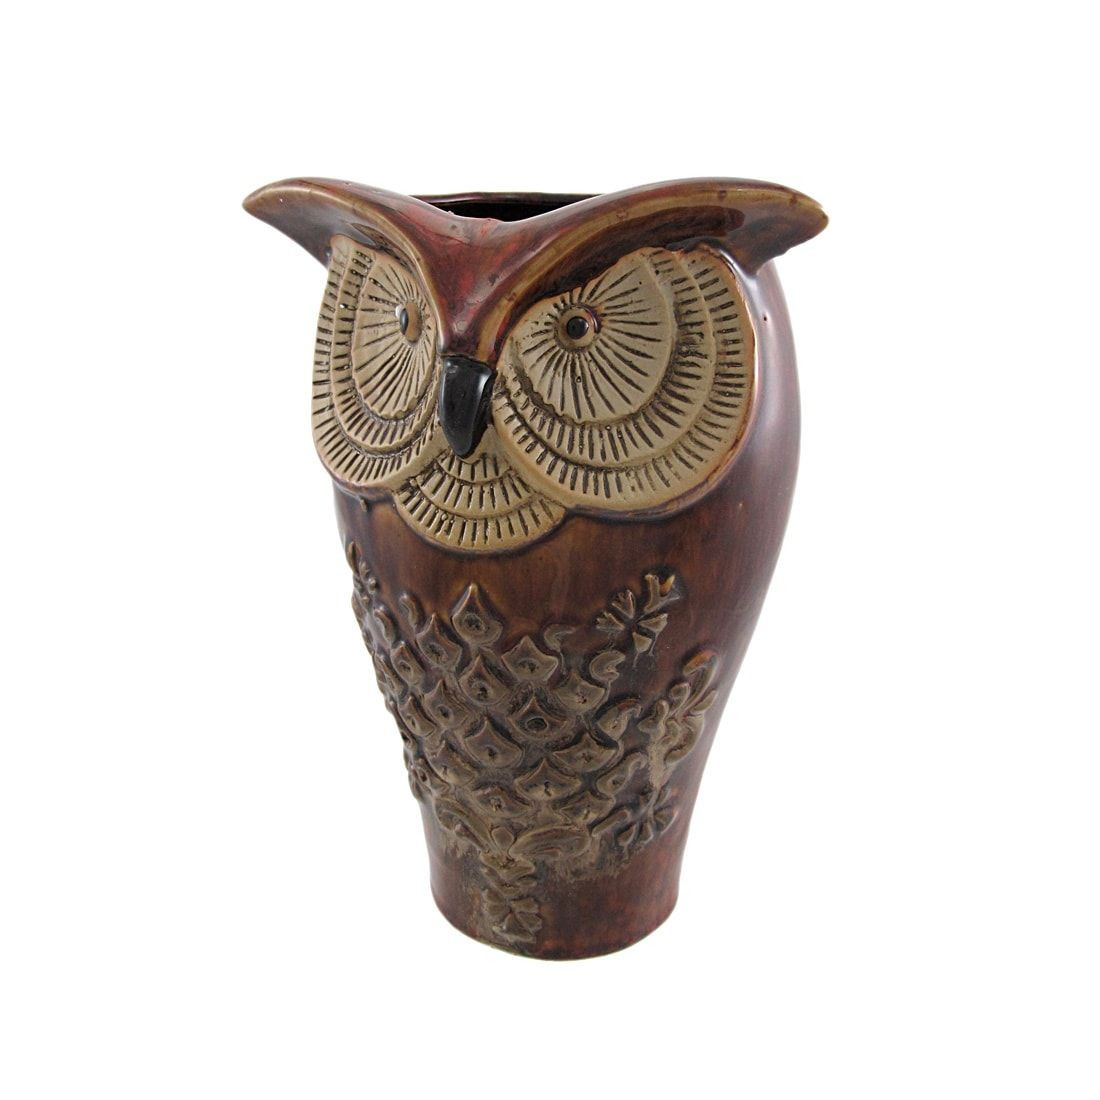 25 Perfect Flower Vase Store 2024 free download flower vase store of 9 inch tall ceramic owl flower vase brown flower vases outlet inside 9 inch tall ceramic owl flower vase brown flower vases outlet store and products